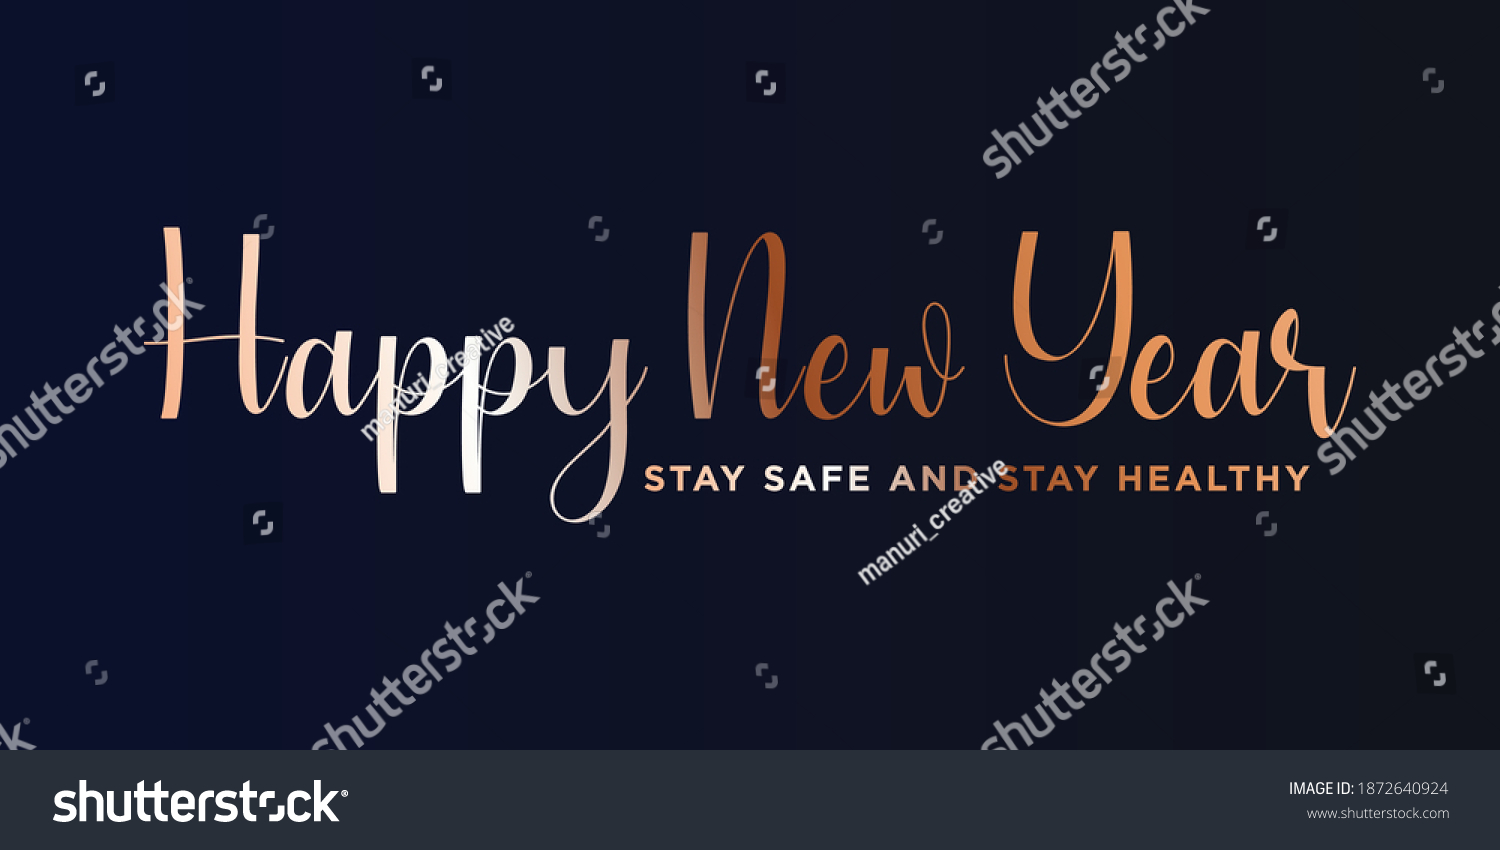 2021 HAPPY NEW YEAR,Stay safe and stay healthy text. Design template celebration typography poster, banner or greeting card for happy new year. #1872640924